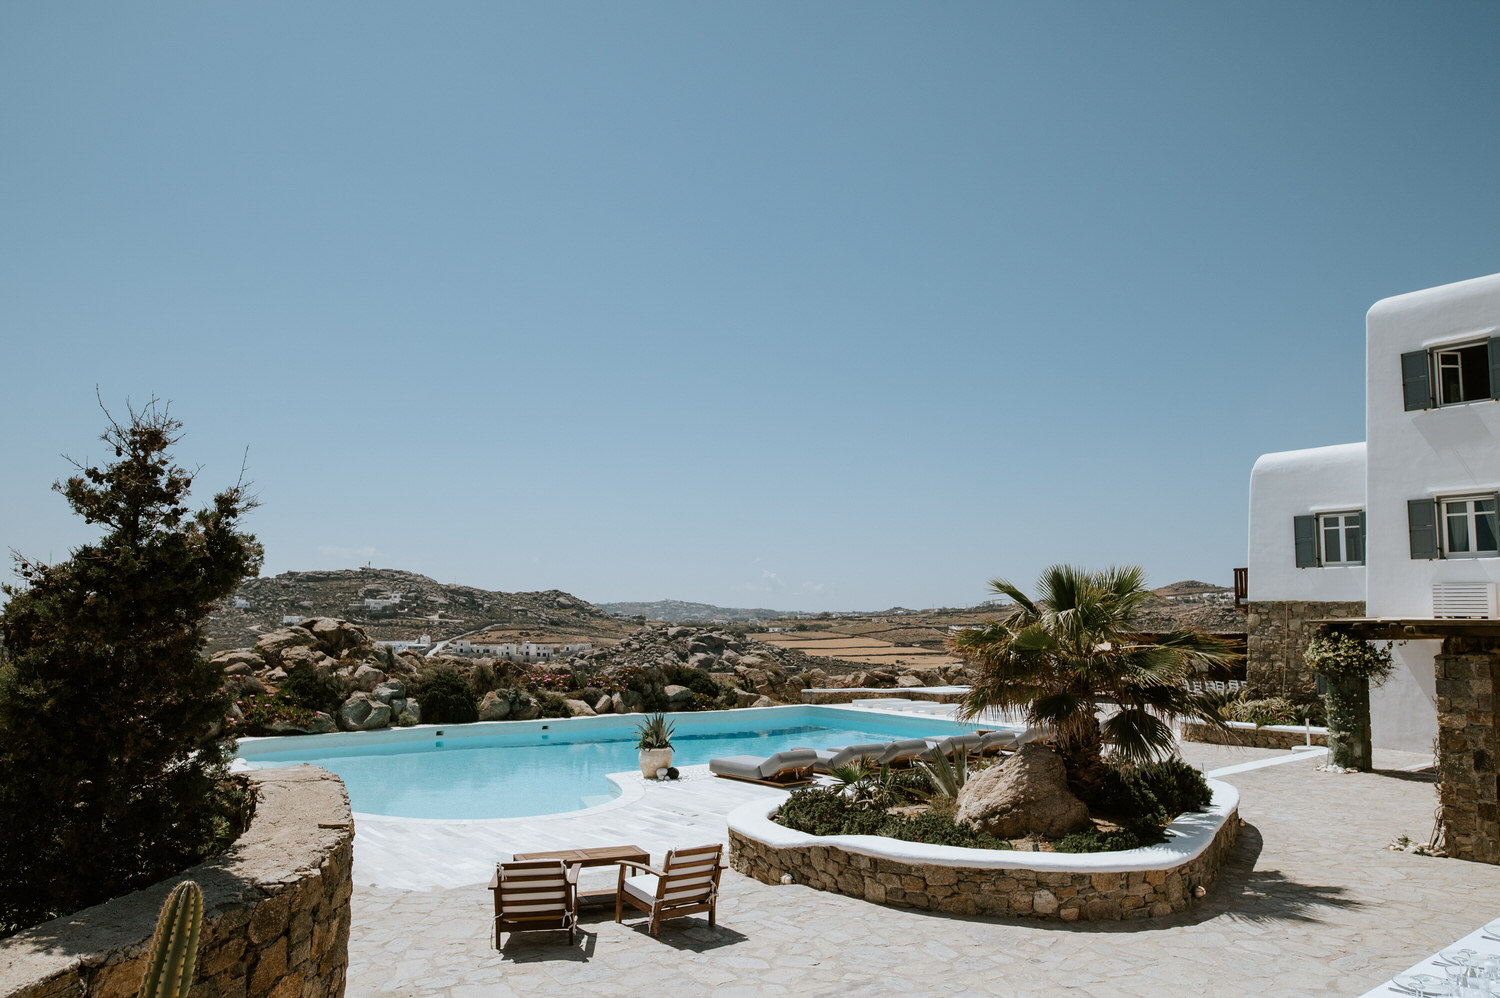 Mykonos wedding photographer: panorama of the villas and the magnificent pool in front with the views over the Mykonian landscape.